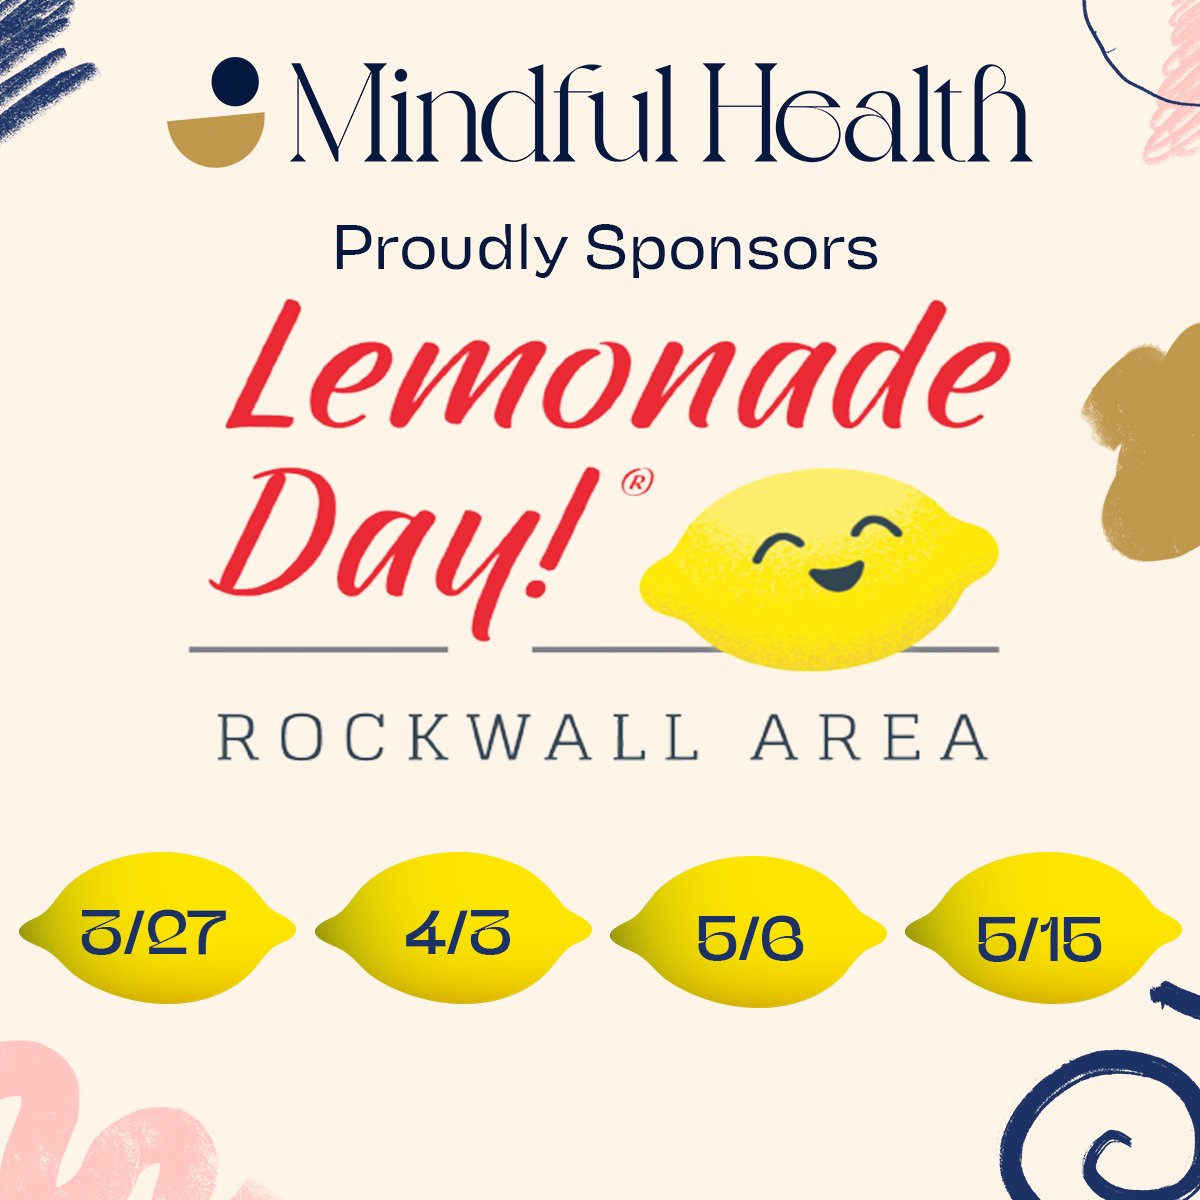 Mindful Health is proud to sponsor Lemonade Day in Rockwall, Texas! Join us as we encourage young entrepreneurs to embrace their creativity and develop valuable business skills. 🍋🍹 #mindfulhealth #lemonadeday #youngentrepreneurs #rockwalltx